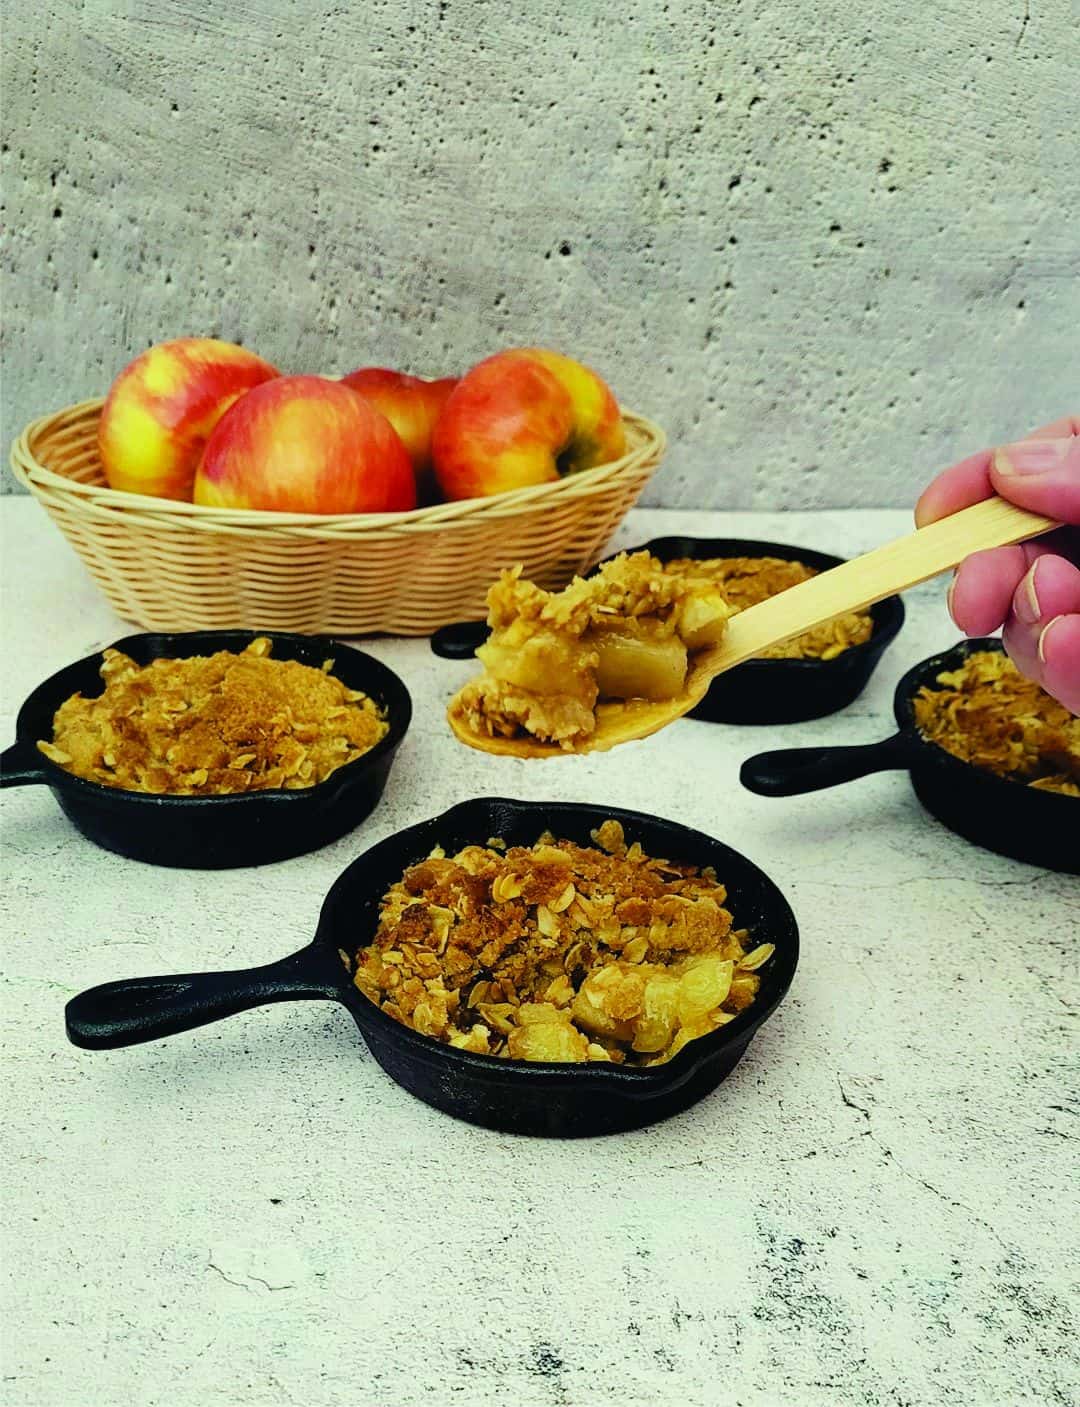 individual apples crisps in pans with a spoon digging into one pan. a basket of apples in the background